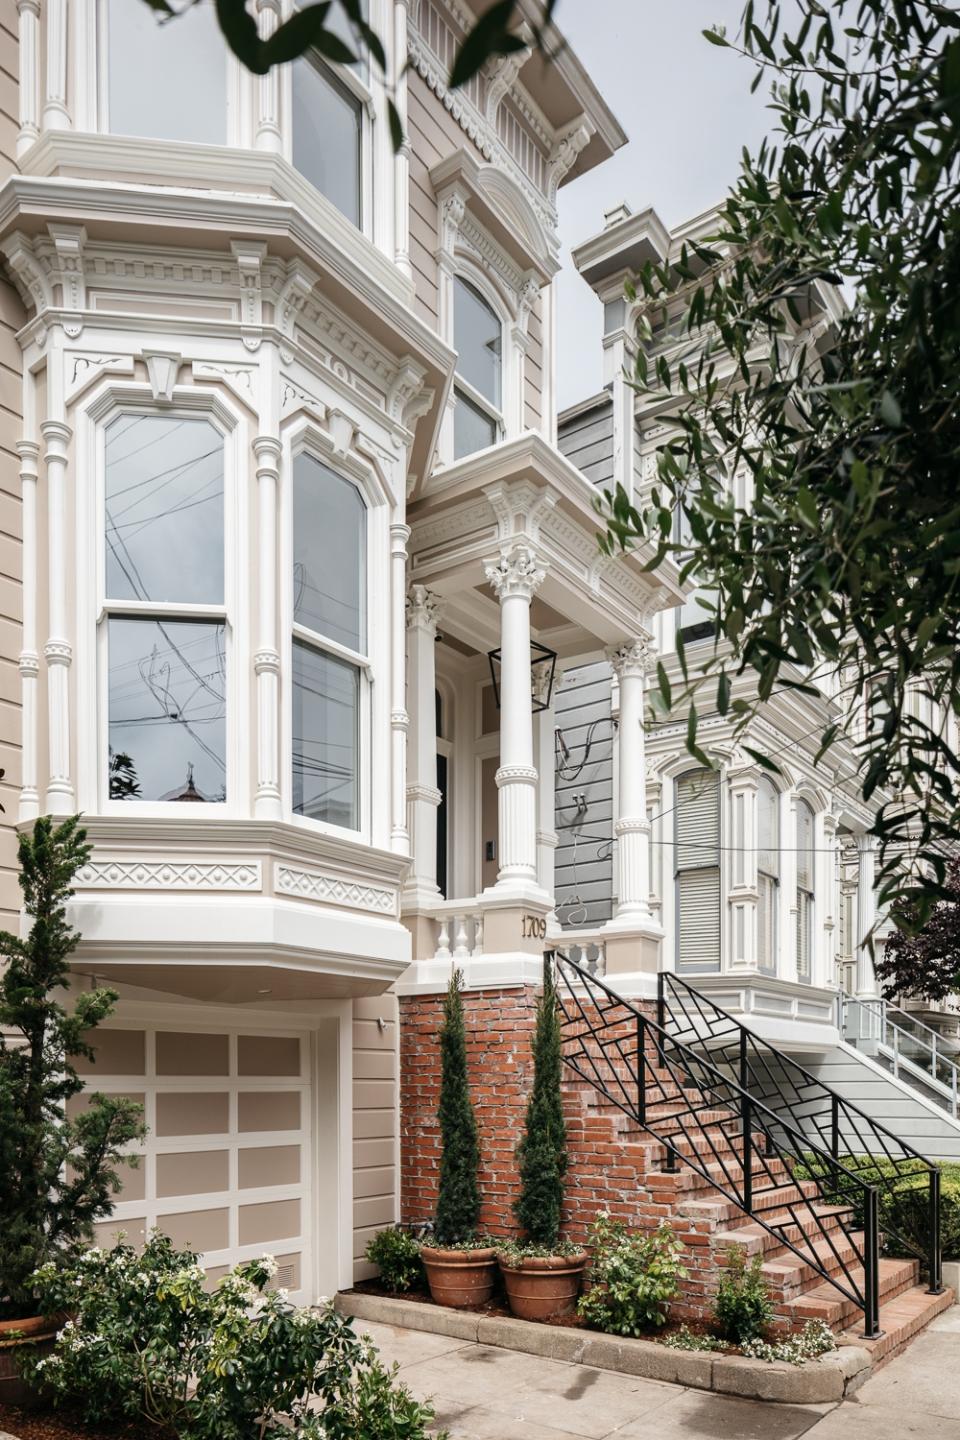 The Victorian-style home is among San Francisco's iconic "Postcard Row" of houses